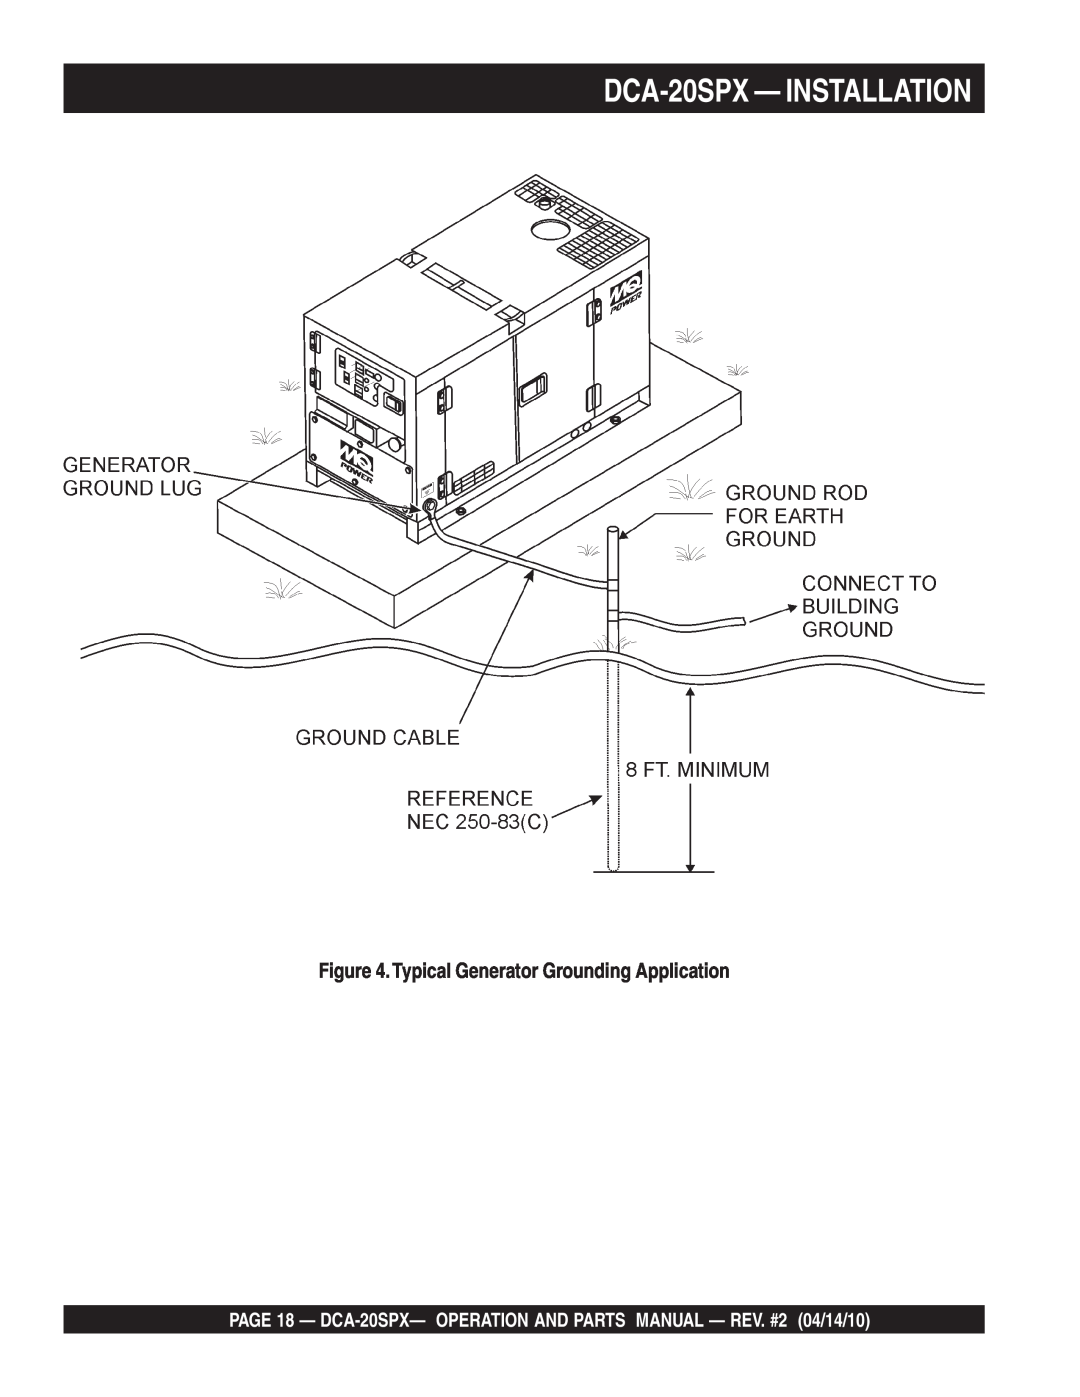 Multiquip operation manual DCA-20SPX - INSTALLATION, Typical Generator Grounding Application 